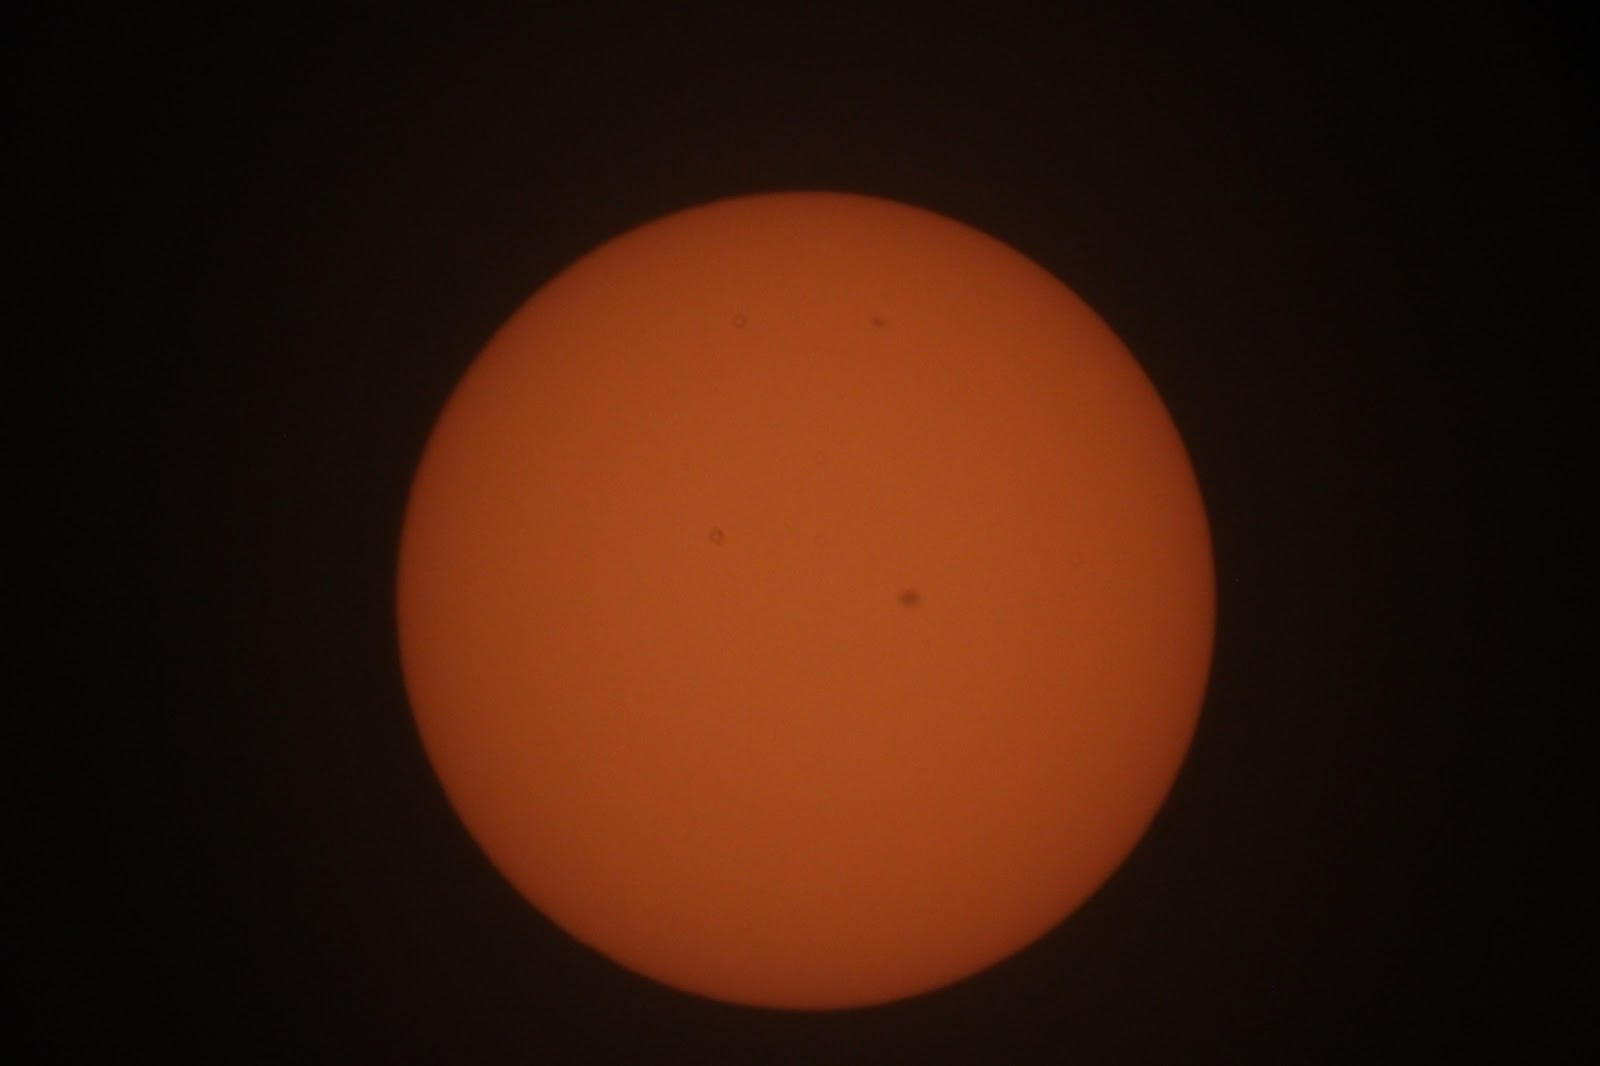 oris's very cool picture of the sun. sunspots are visible!